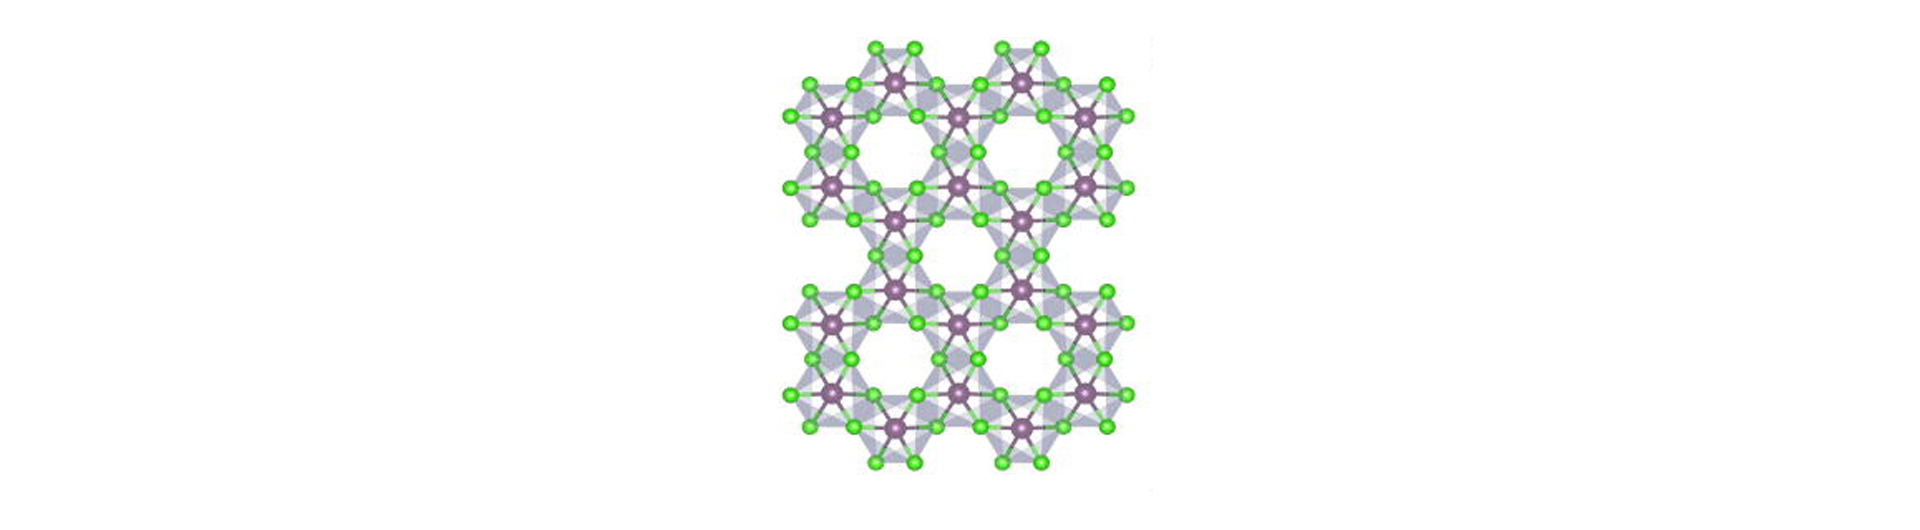 crystal and electronic structure of α-RuCl3